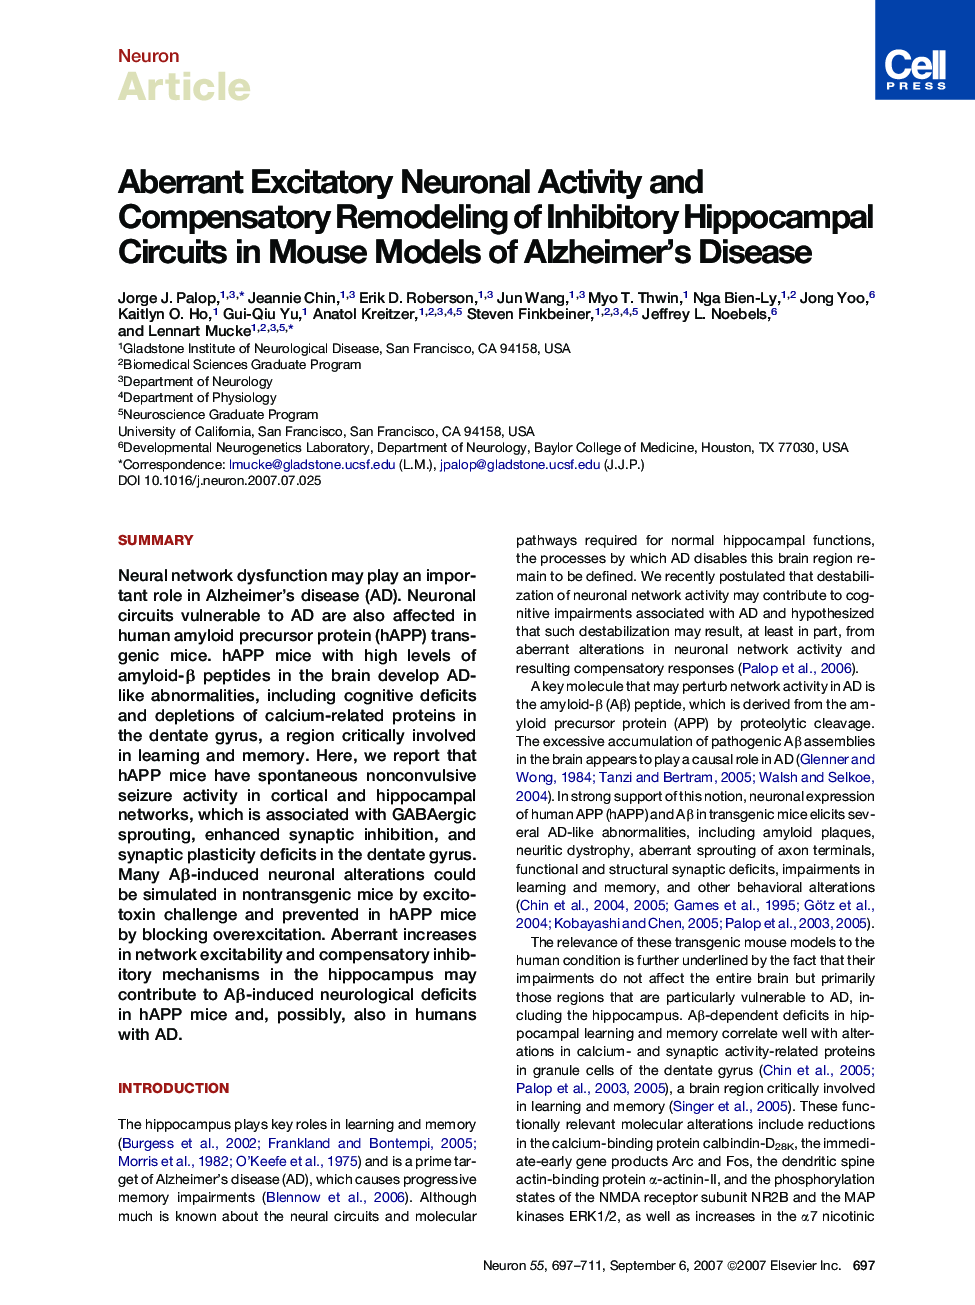 Aberrant Excitatory Neuronal Activity and Compensatory Remodeling of Inhibitory Hippocampal Circuits in Mouse Models of Alzheimer's Disease